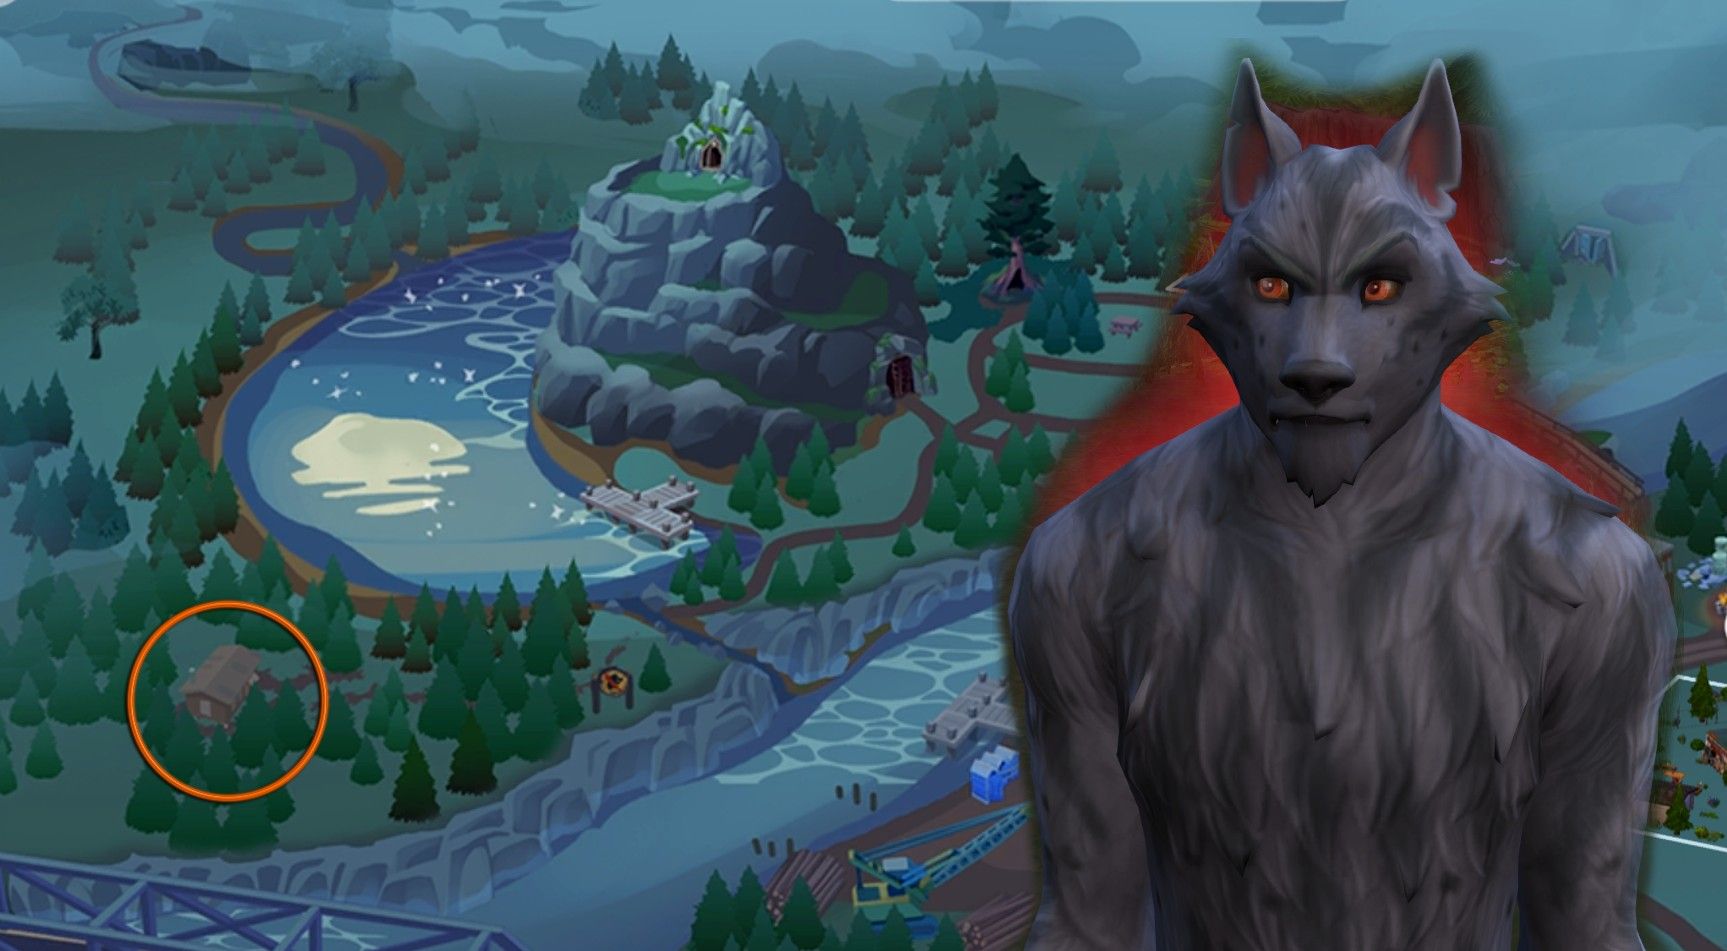 The location of mean werewolf Greg's house on the map of Moonwood Mill in The Sims 4 Werewolves